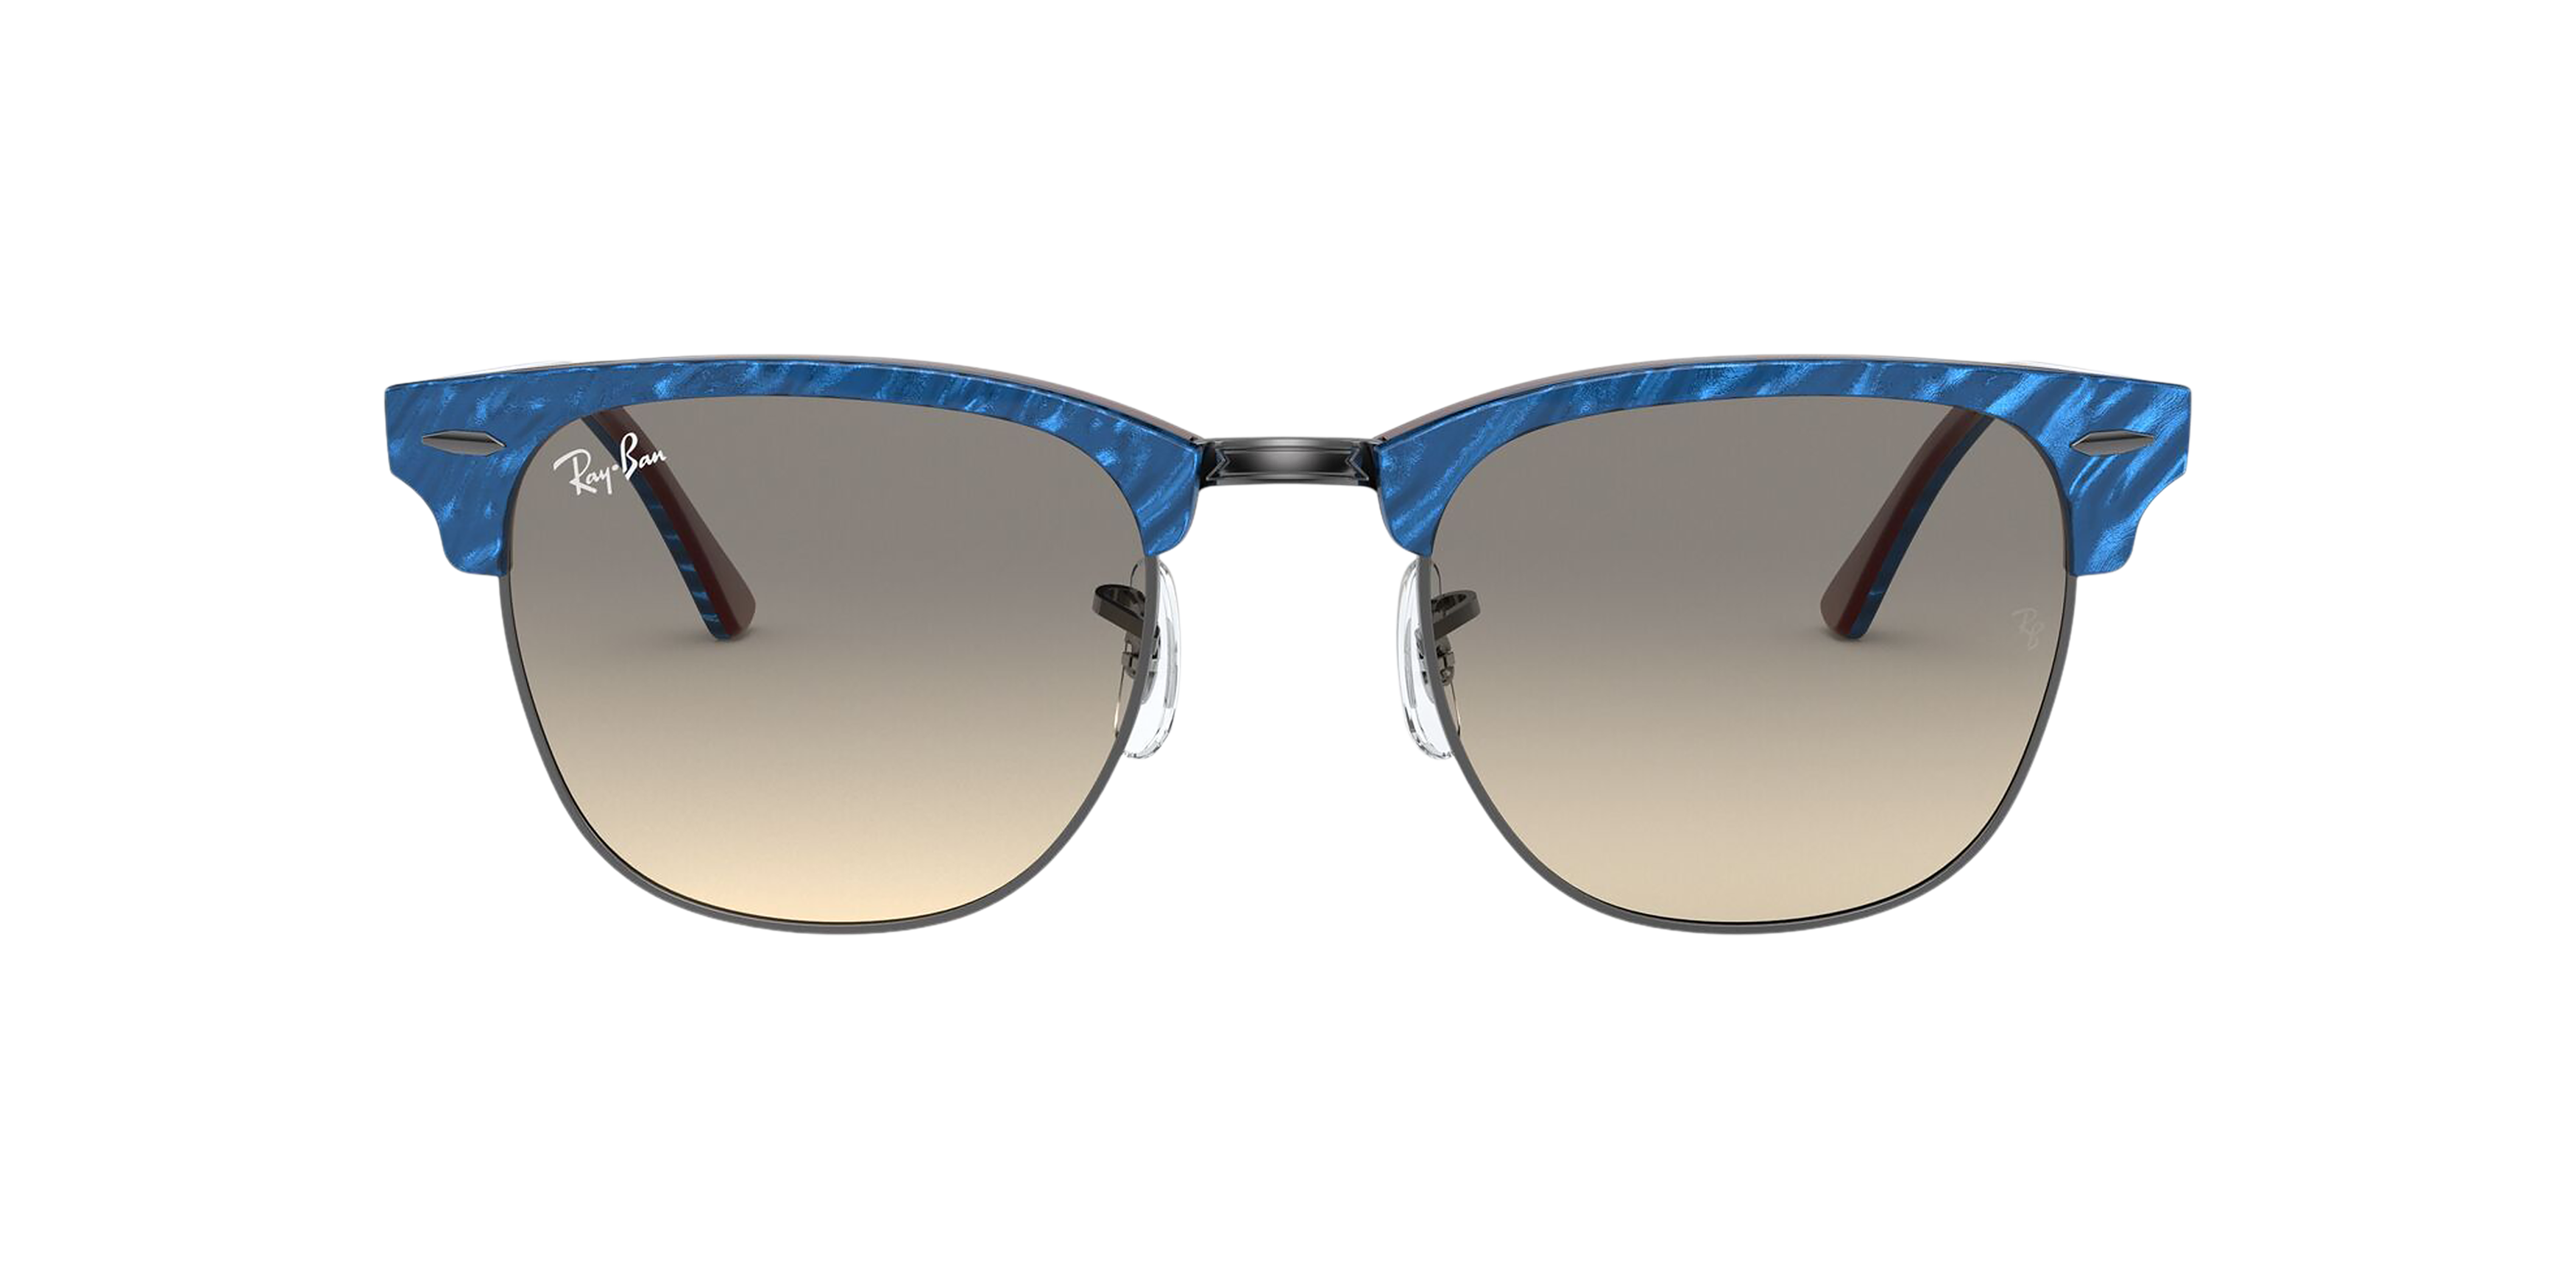 [products.image.front] Ray-Ban Clubmaster Classic RB3016 131032